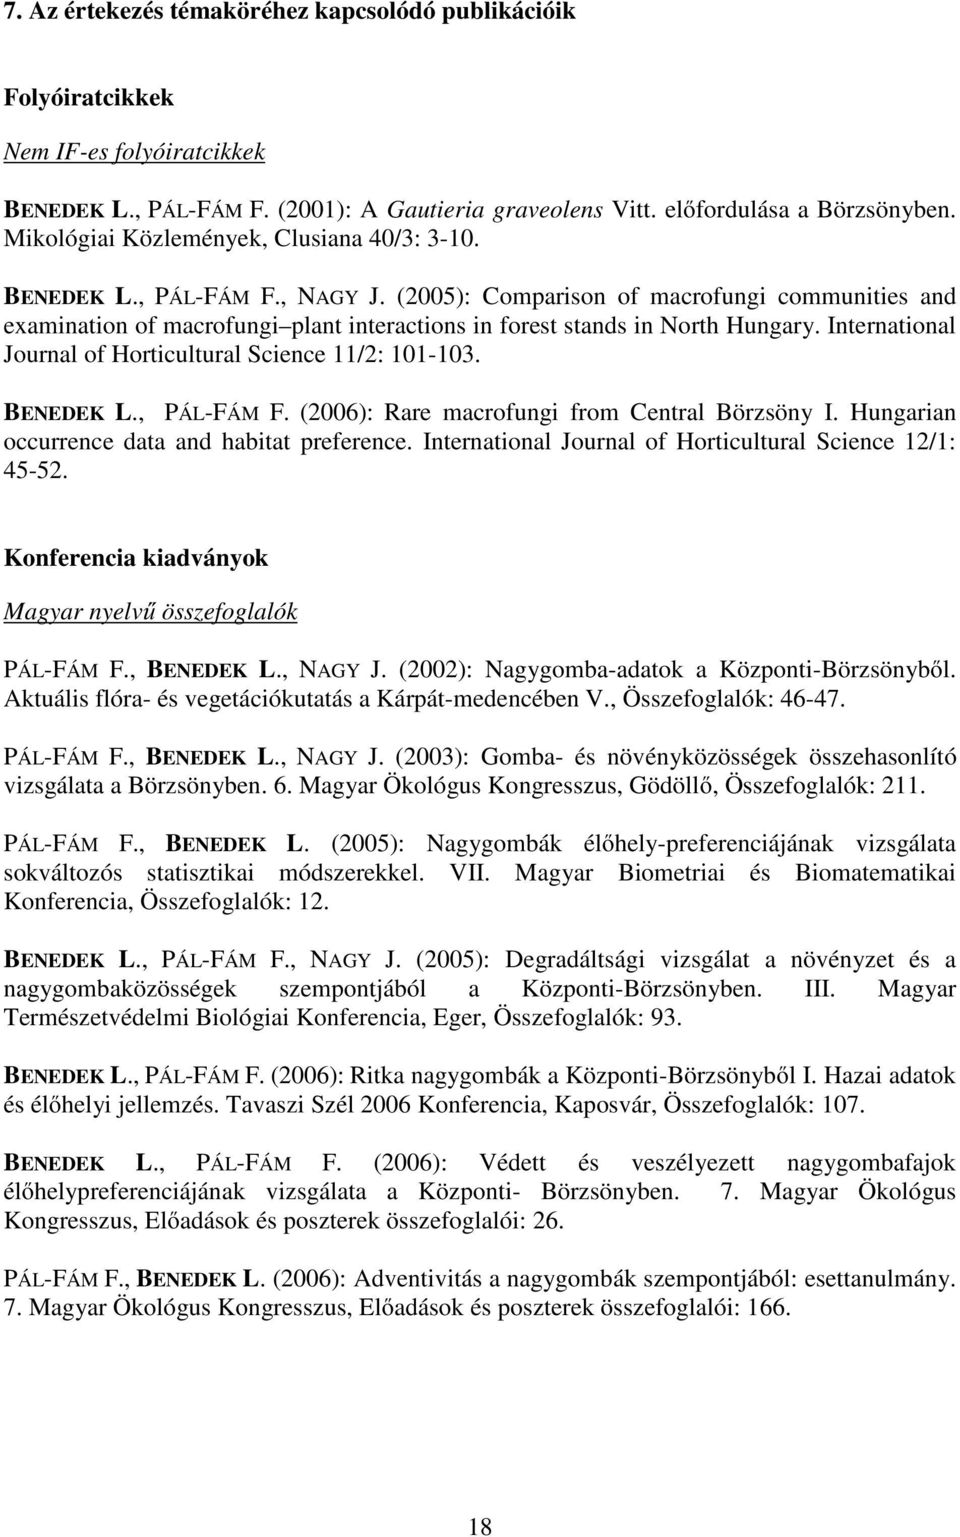 (2005): Comparison of macrofungi communities and examination of macrofungi plant interactions in forest stands in North Hungary. International Journal of Horticultural Science 11/2: 101-103.